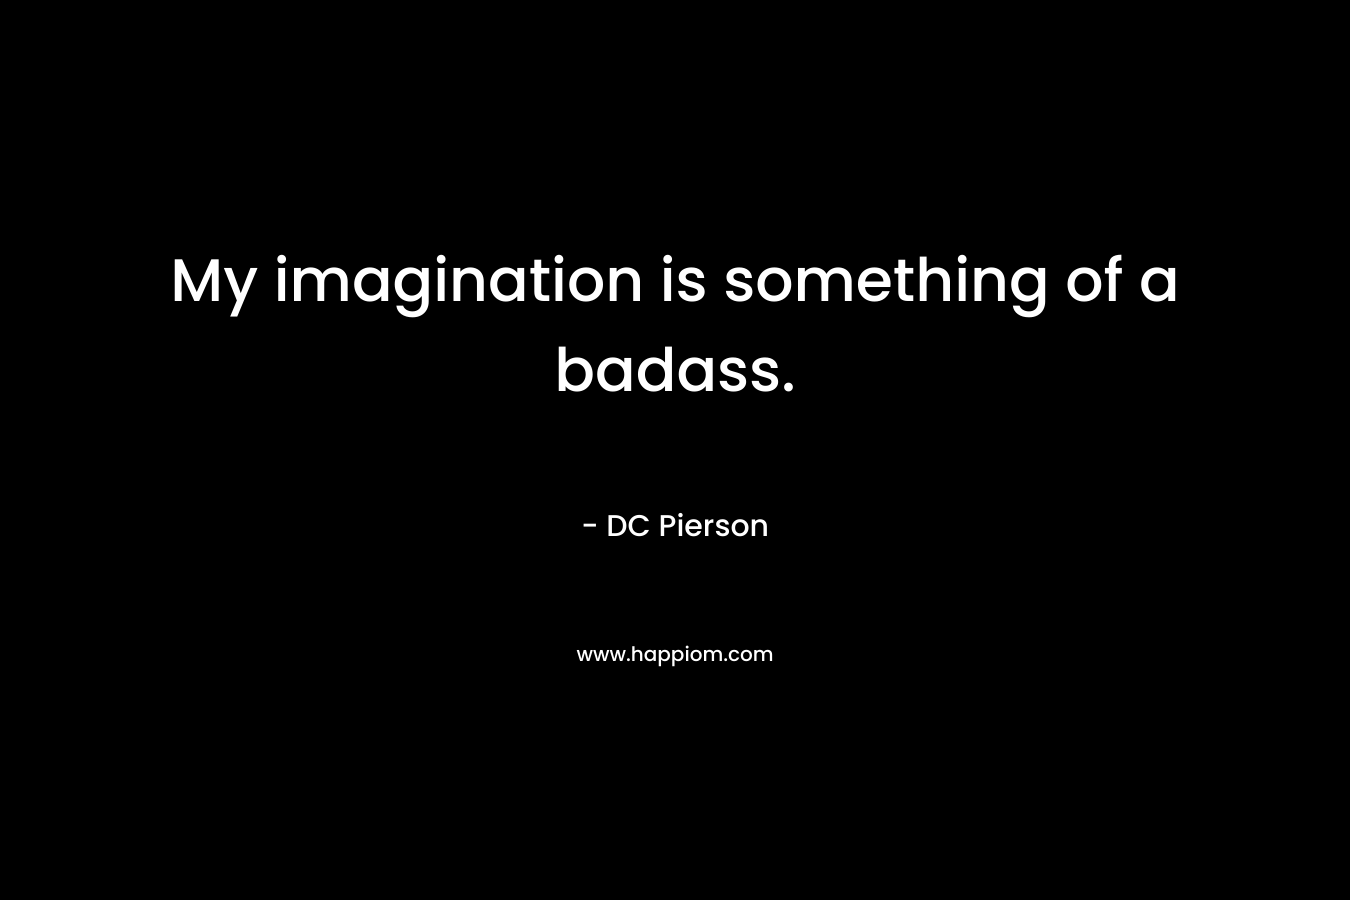 My imagination is something of a badass. – DC Pierson